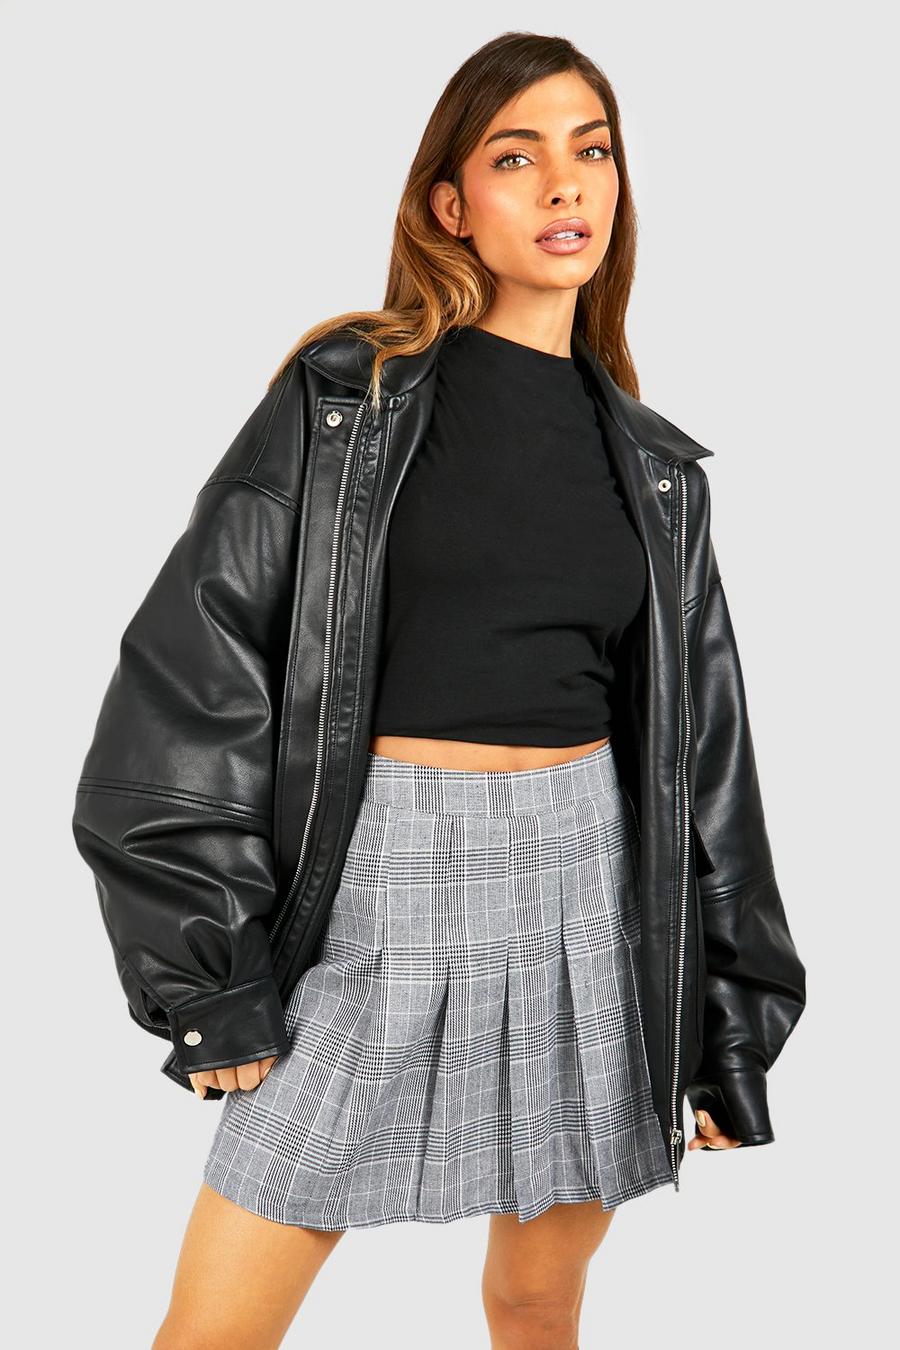 Charcoal grey Woven Flannel Pleated Tennis Skirt